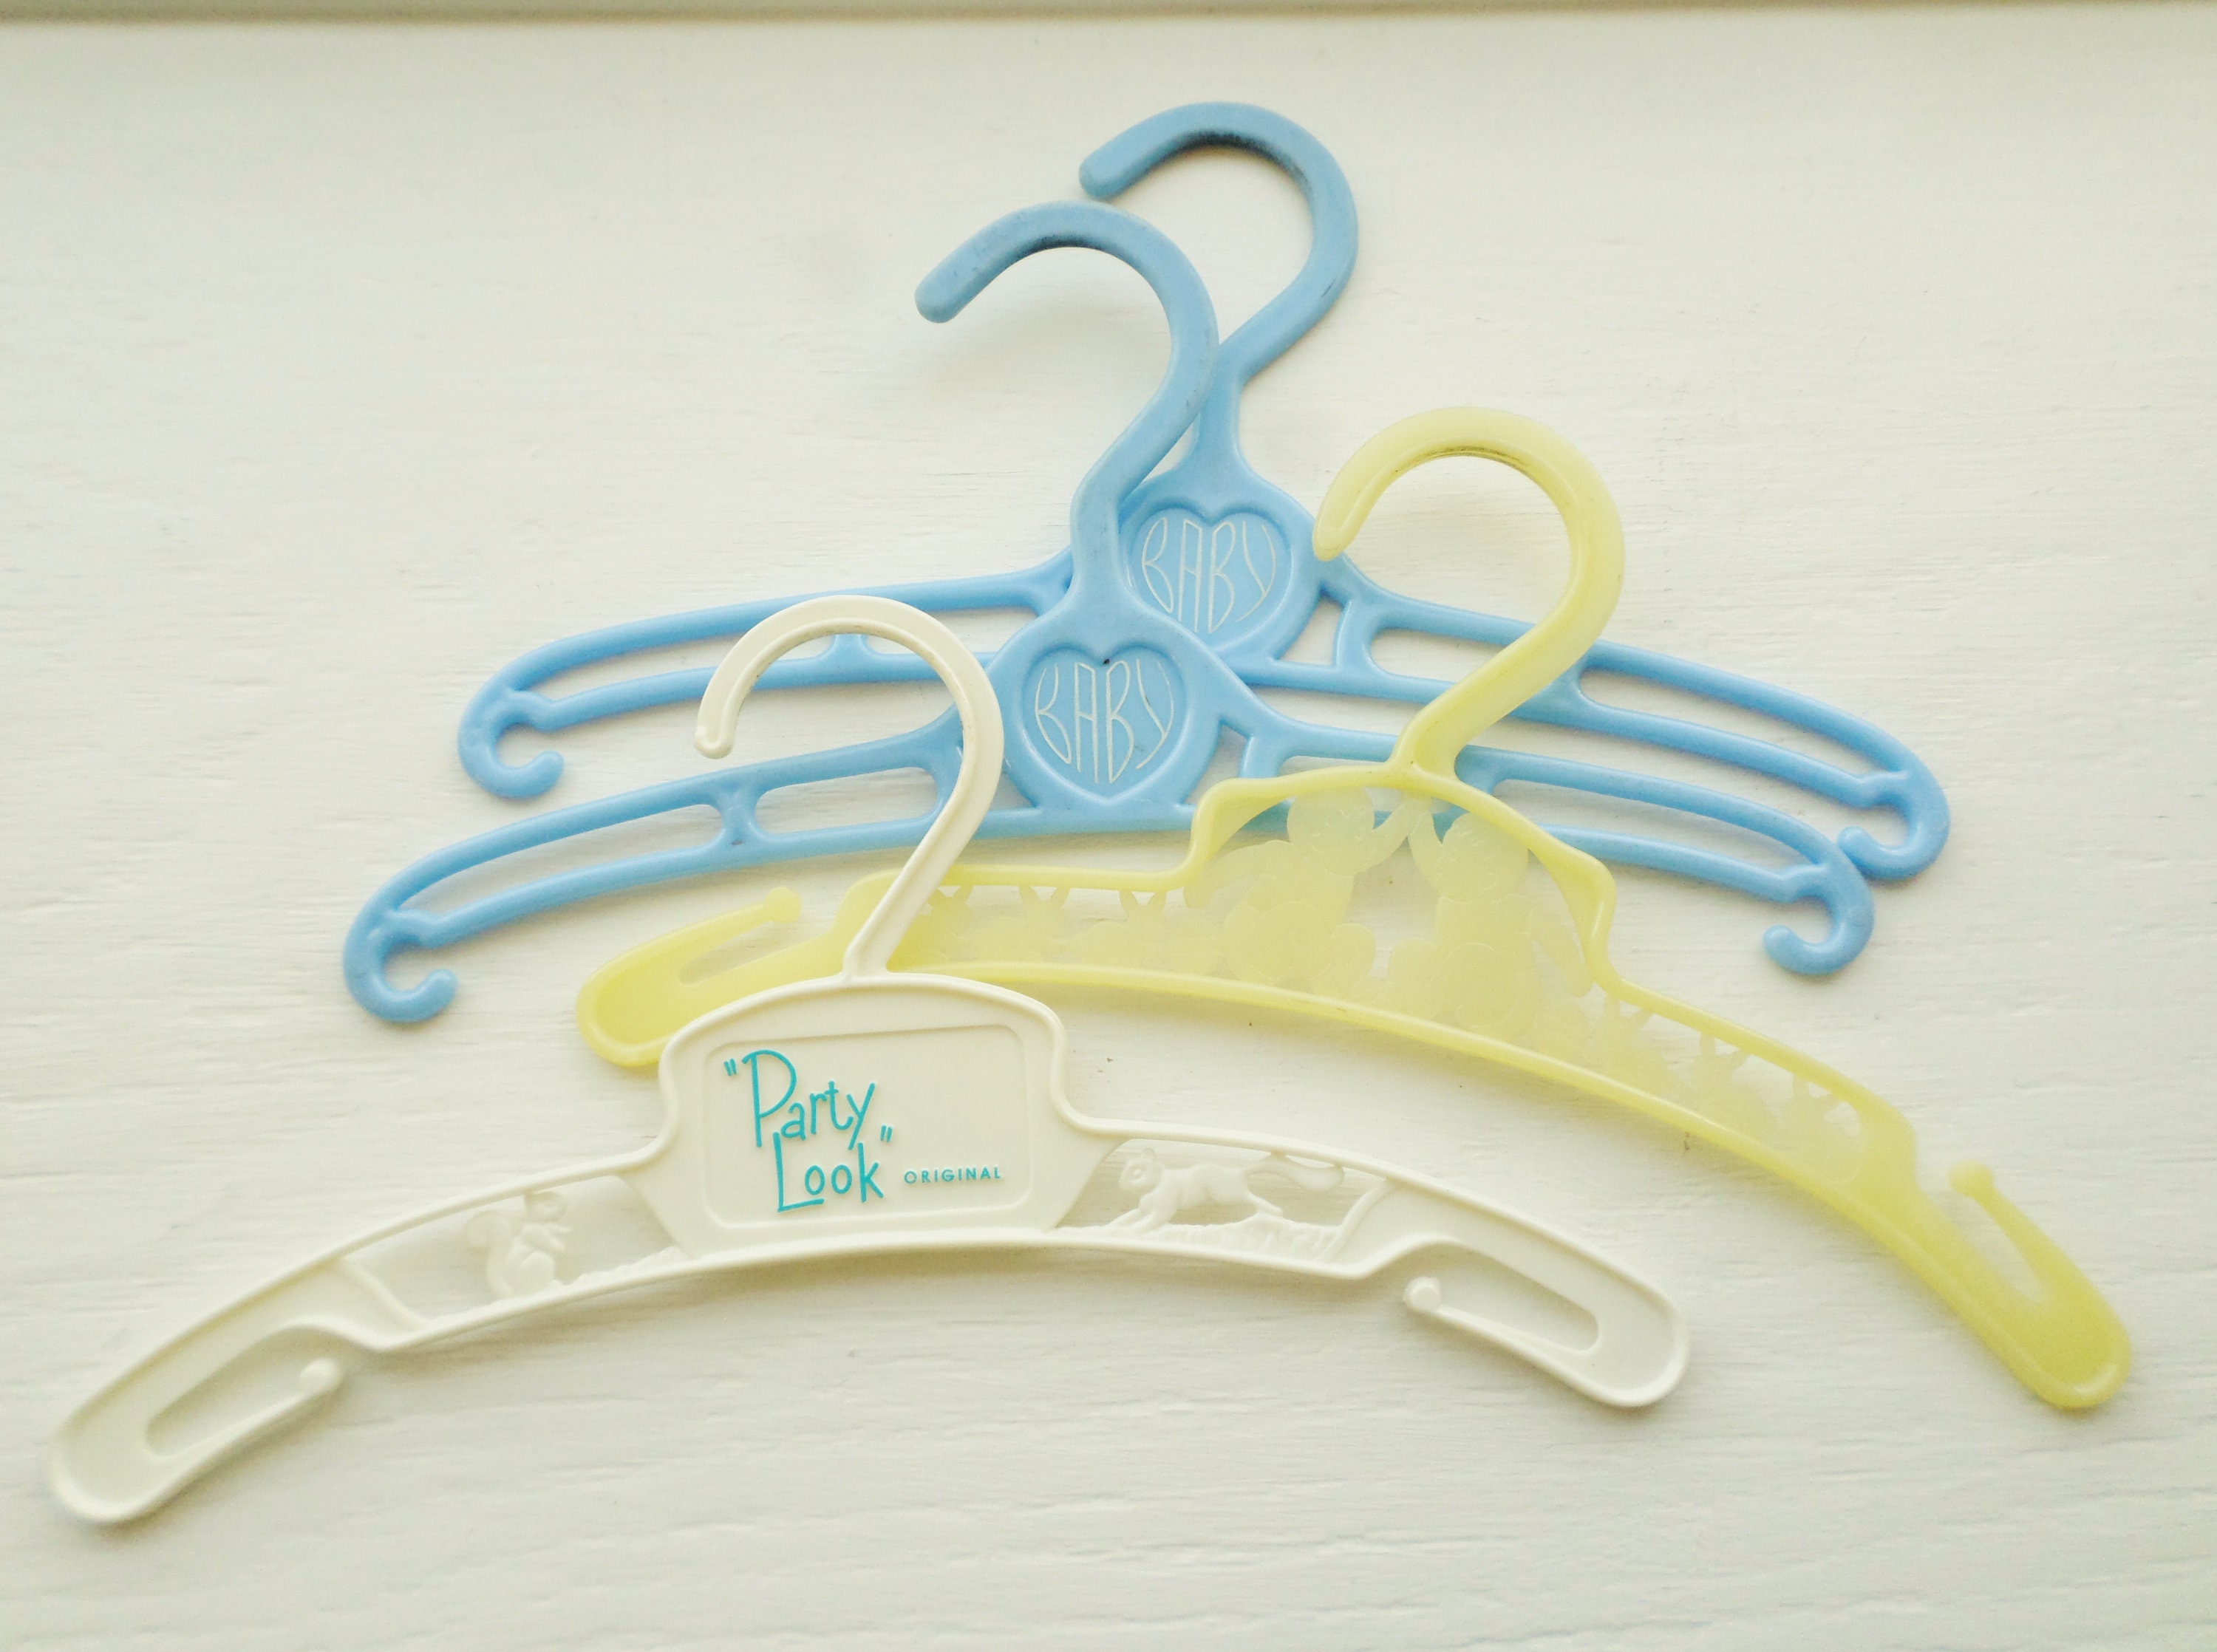 Vintage Plastic Baby Clothes Hangers, Yellow, Set of 4, Warbern Plastics  NY, USA, Animals, Infant Clothes Hangers, Yellow, Blue, White 